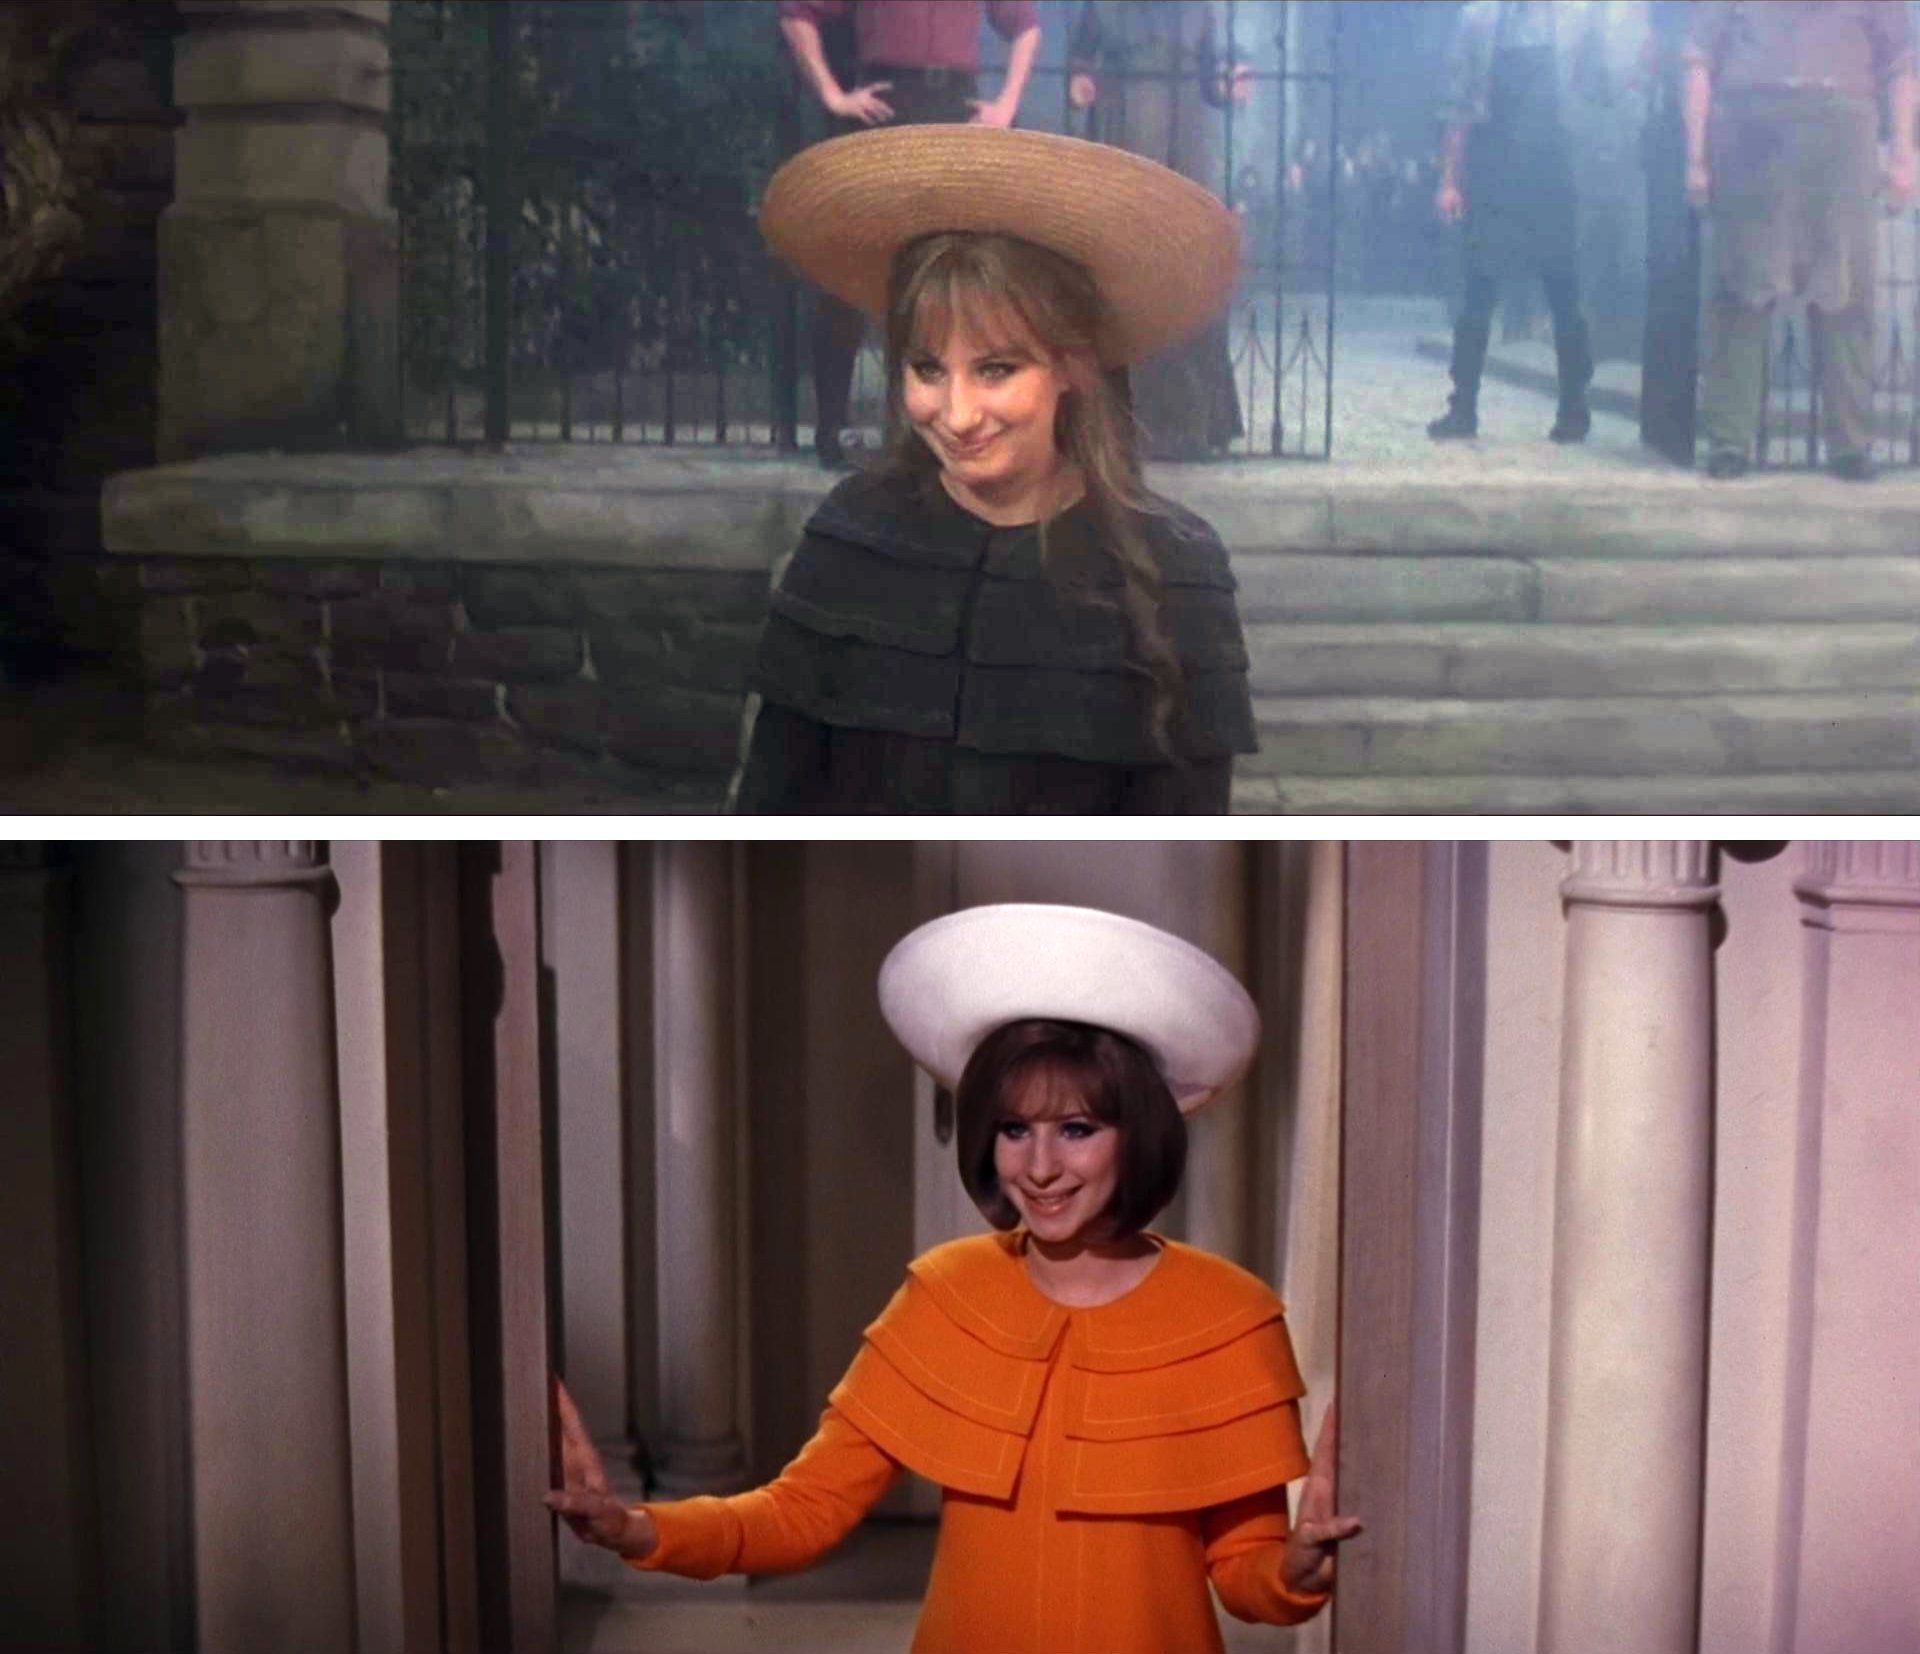 Two looks in one photo - Melinda leaving the orphanage in hat and smock, and Daisy leaving Chabot's office in hat and wrap.